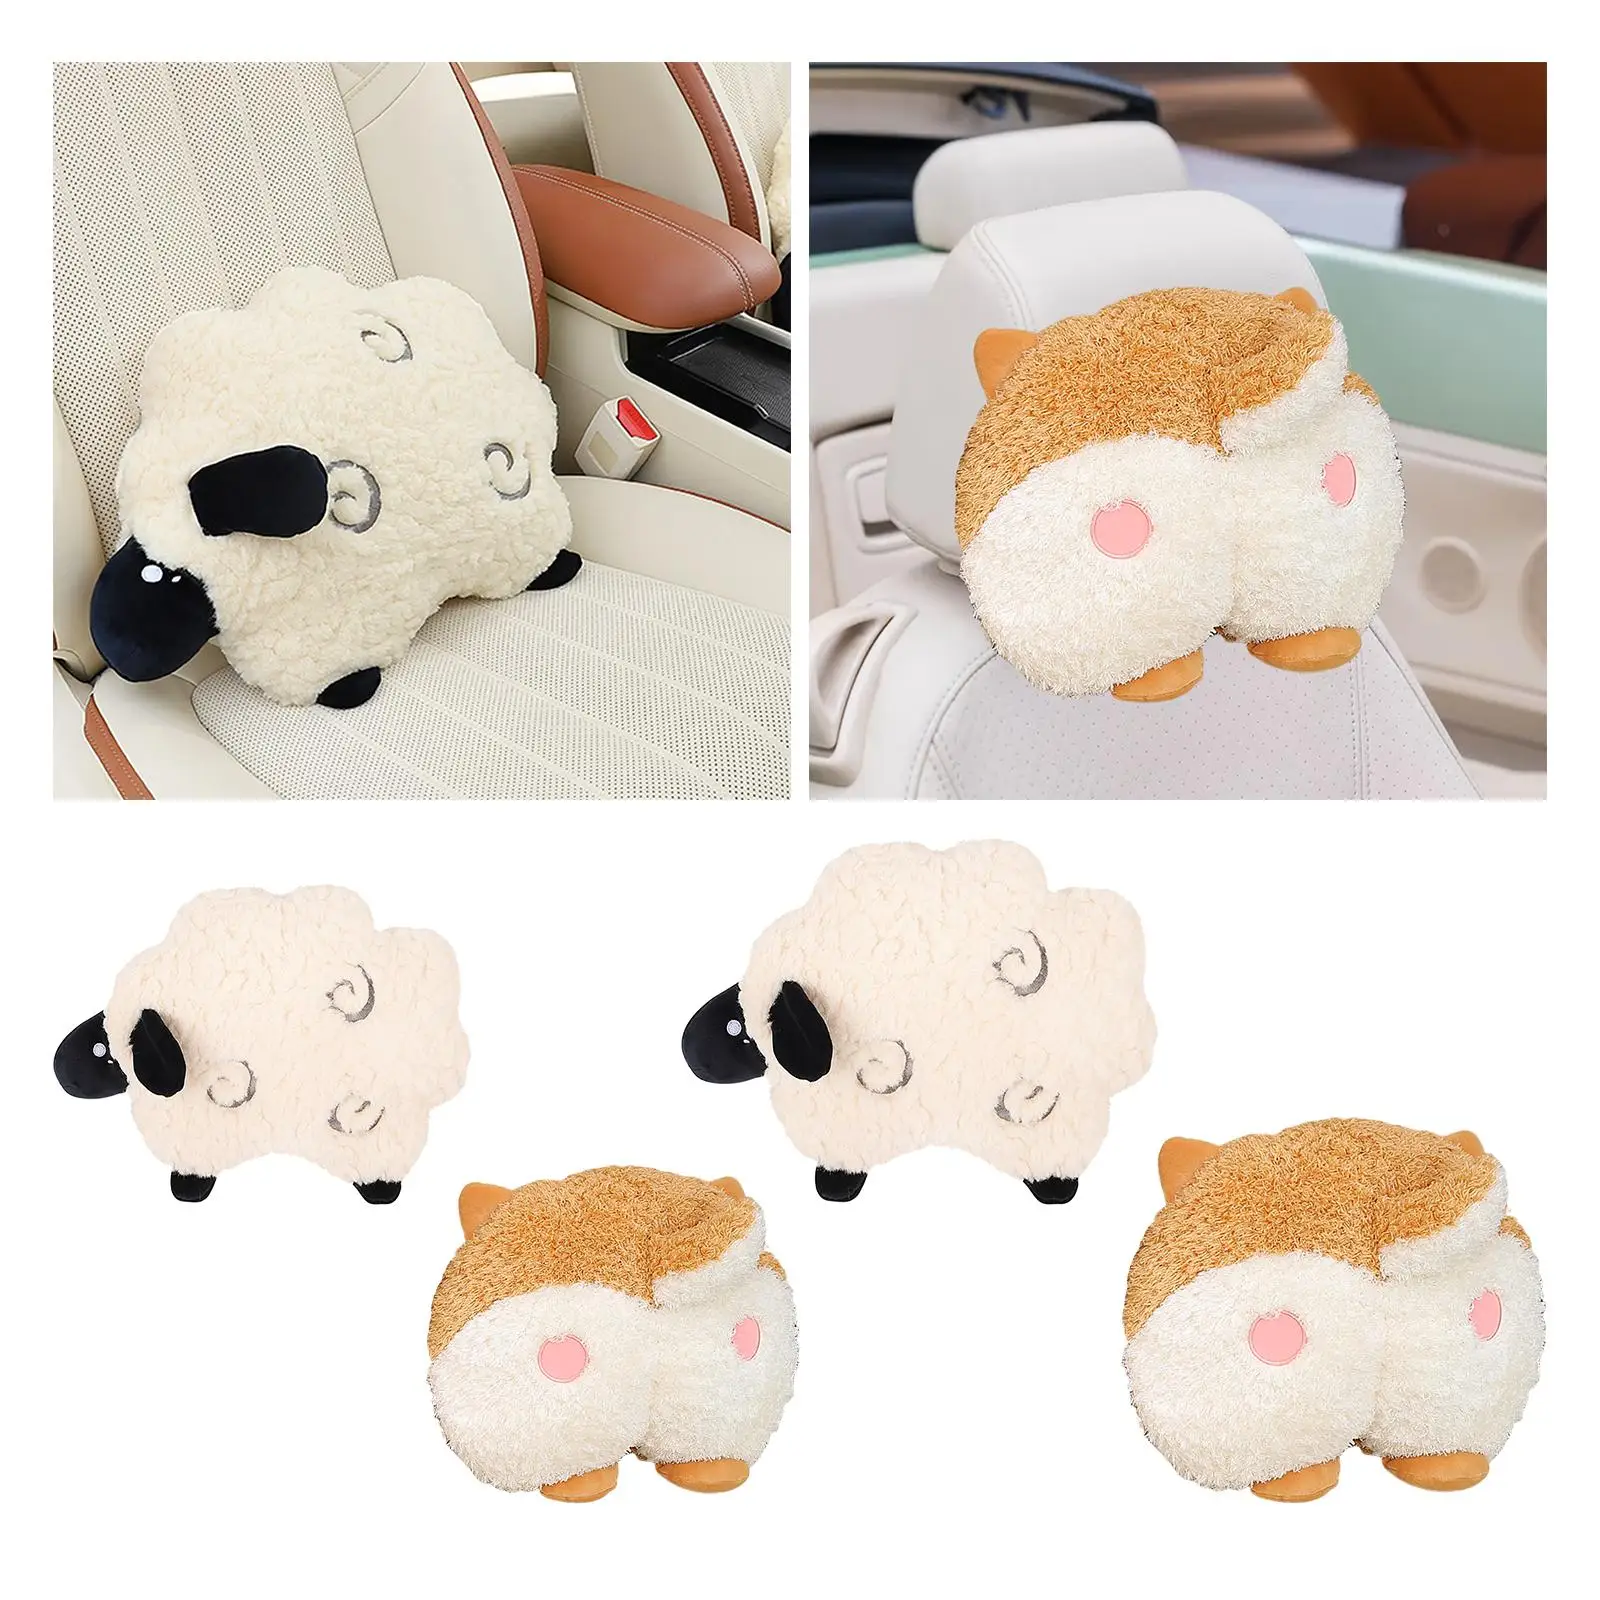 Car Pillow Fittings Plush Car Seat Pillow for Travelling Driving Office